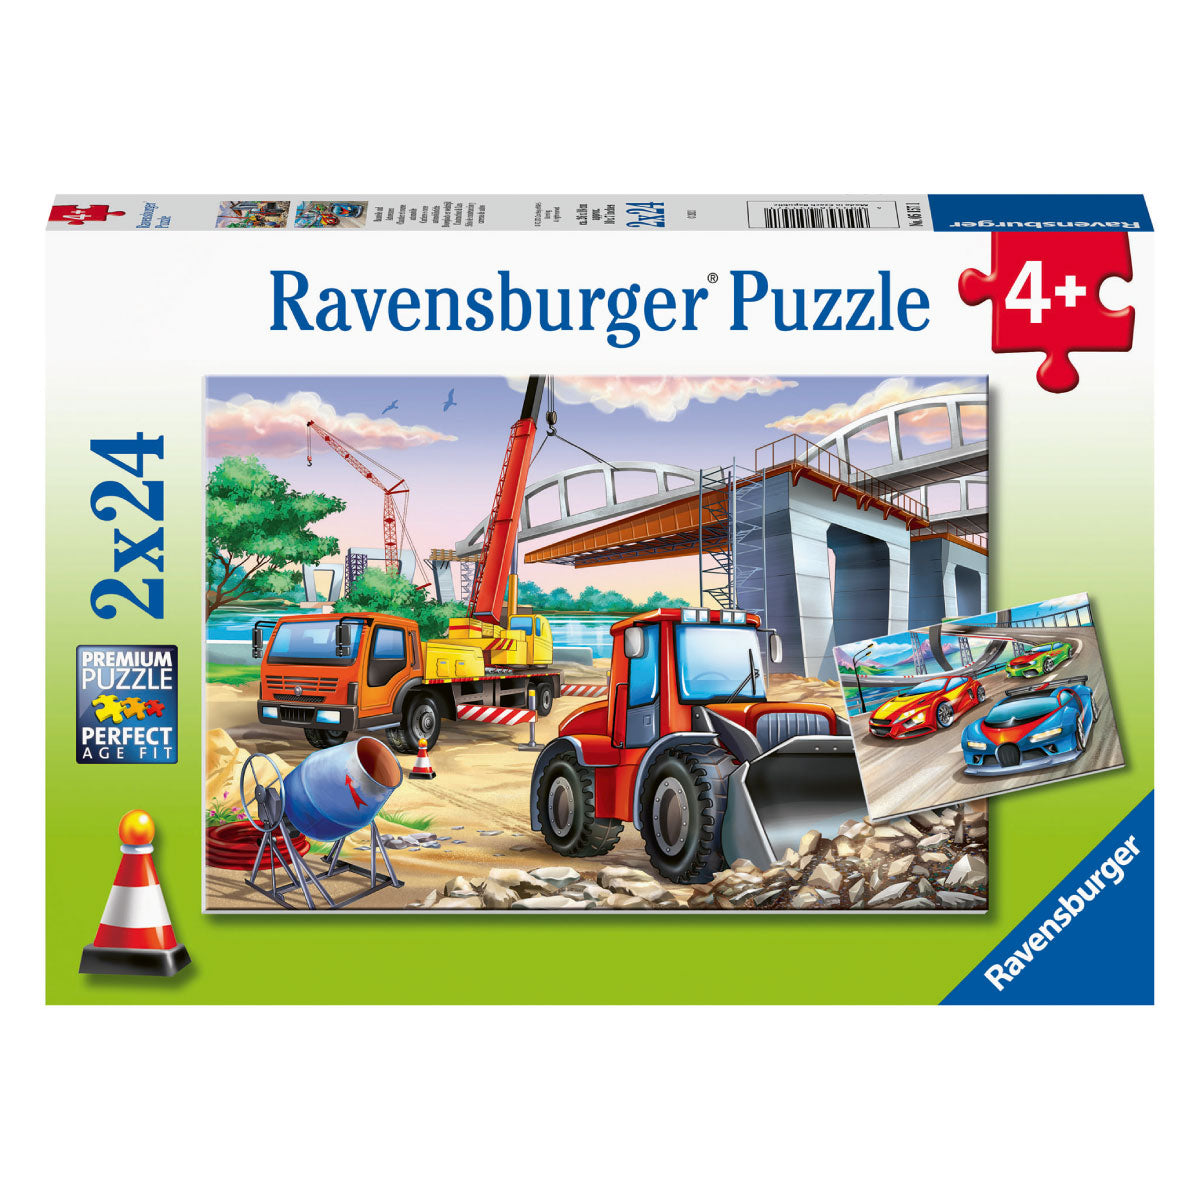 Construction & Cars 2 x 24pc Jigsaw Puzzles from Ravensburger